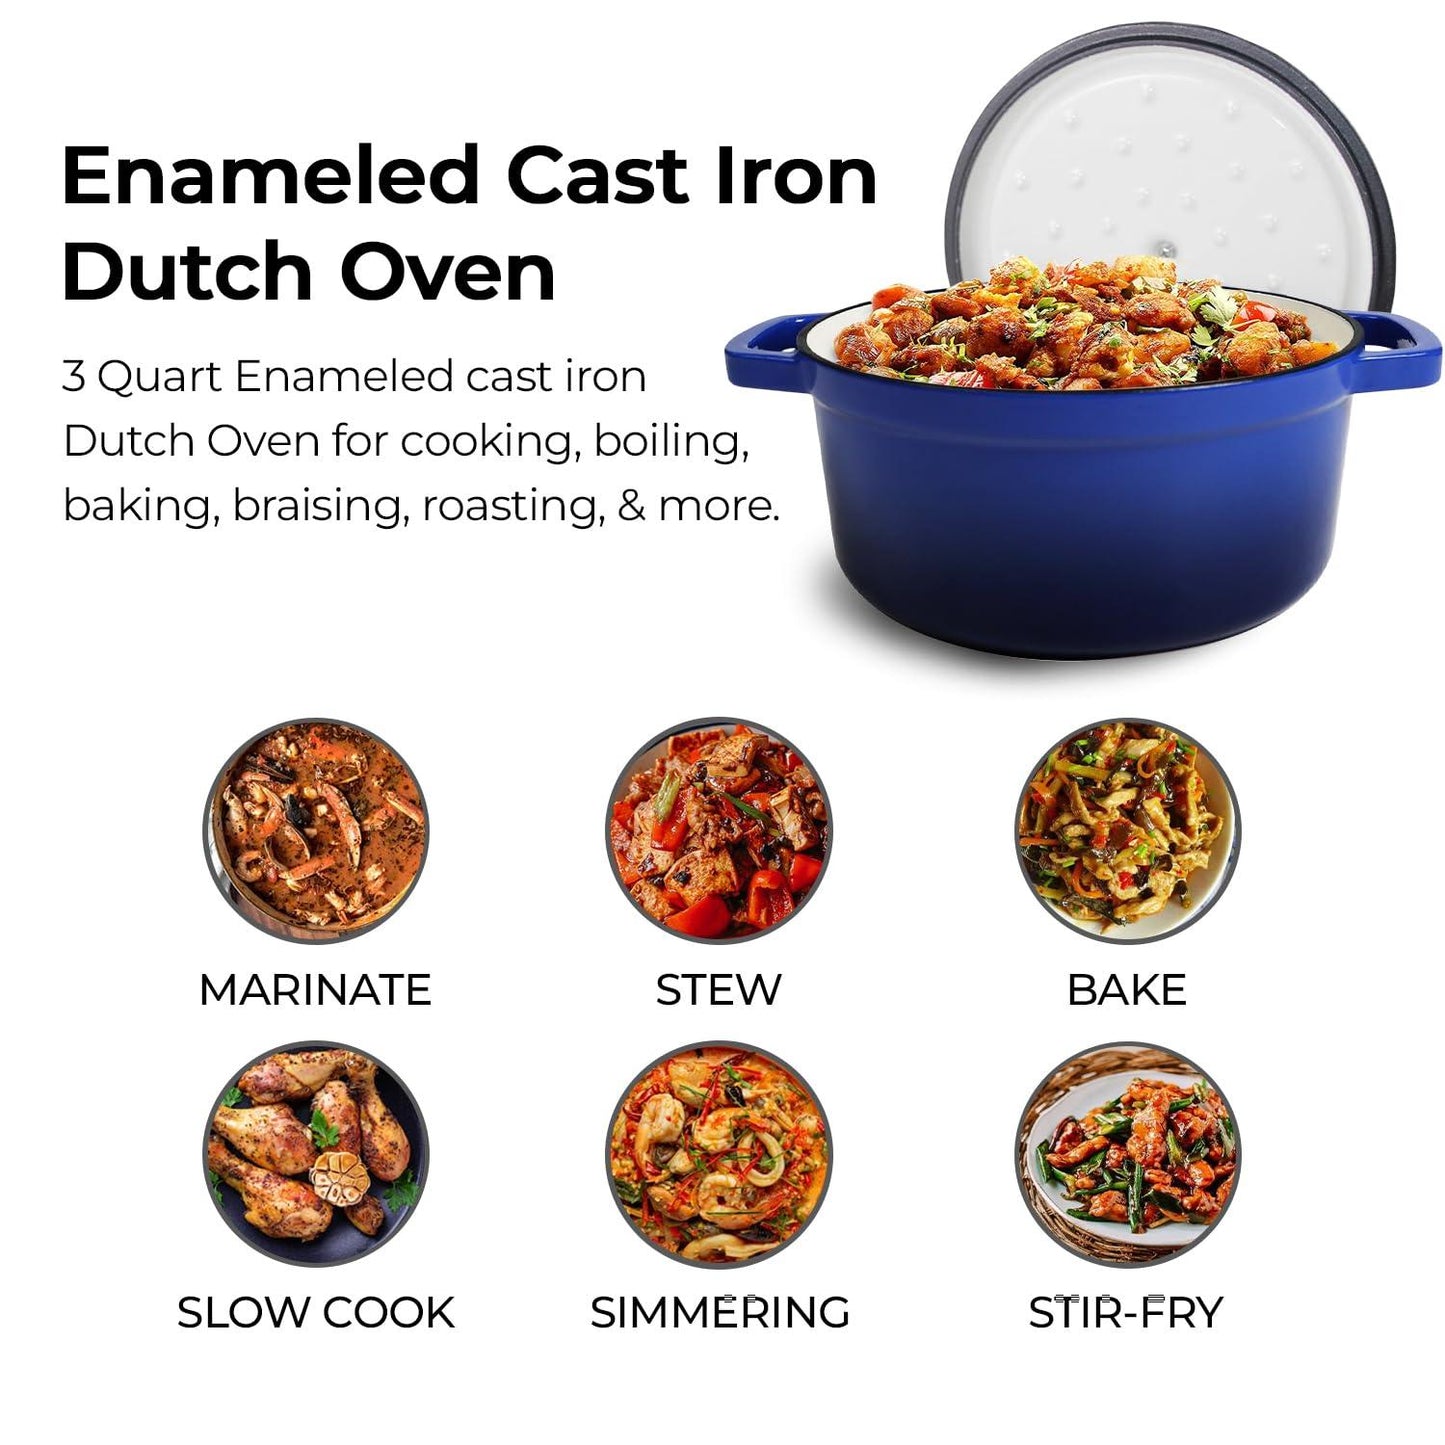 Healthy Choices 3 Qt Enameled Cast Iron Dutch Oven Pot with Lid, Small Blue Dutch Oven for Bread Baking, Ideal for Family of 4, Wedding Registry Ideas,Even Heat Distribution, All Cooktops - Upto 500°F - CookCave